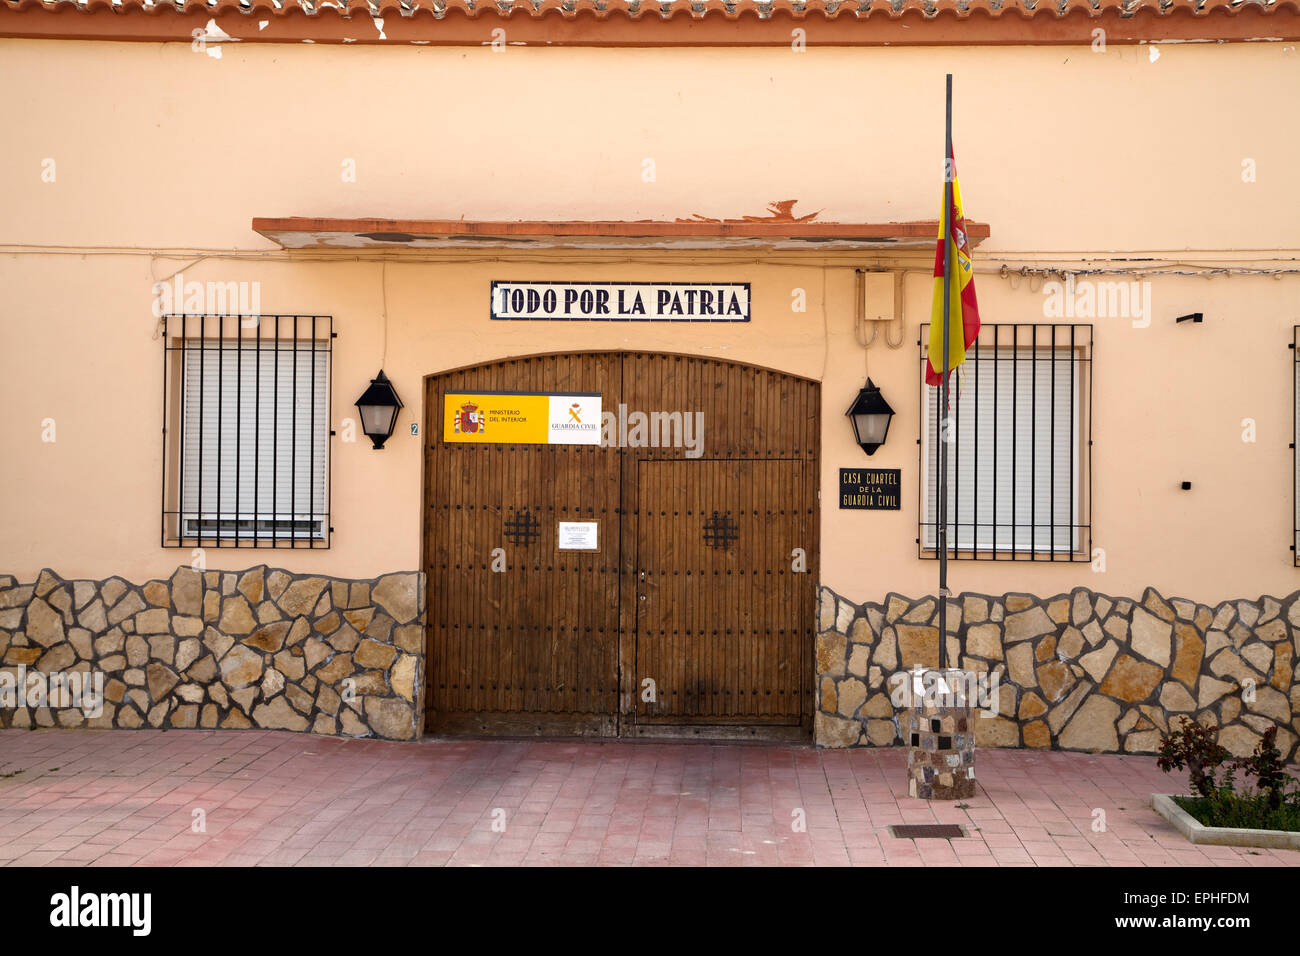 Guardia Civil station in Spain with the motto 'Todo por la Patria' (Everything for the country) above the door. Stock Photo